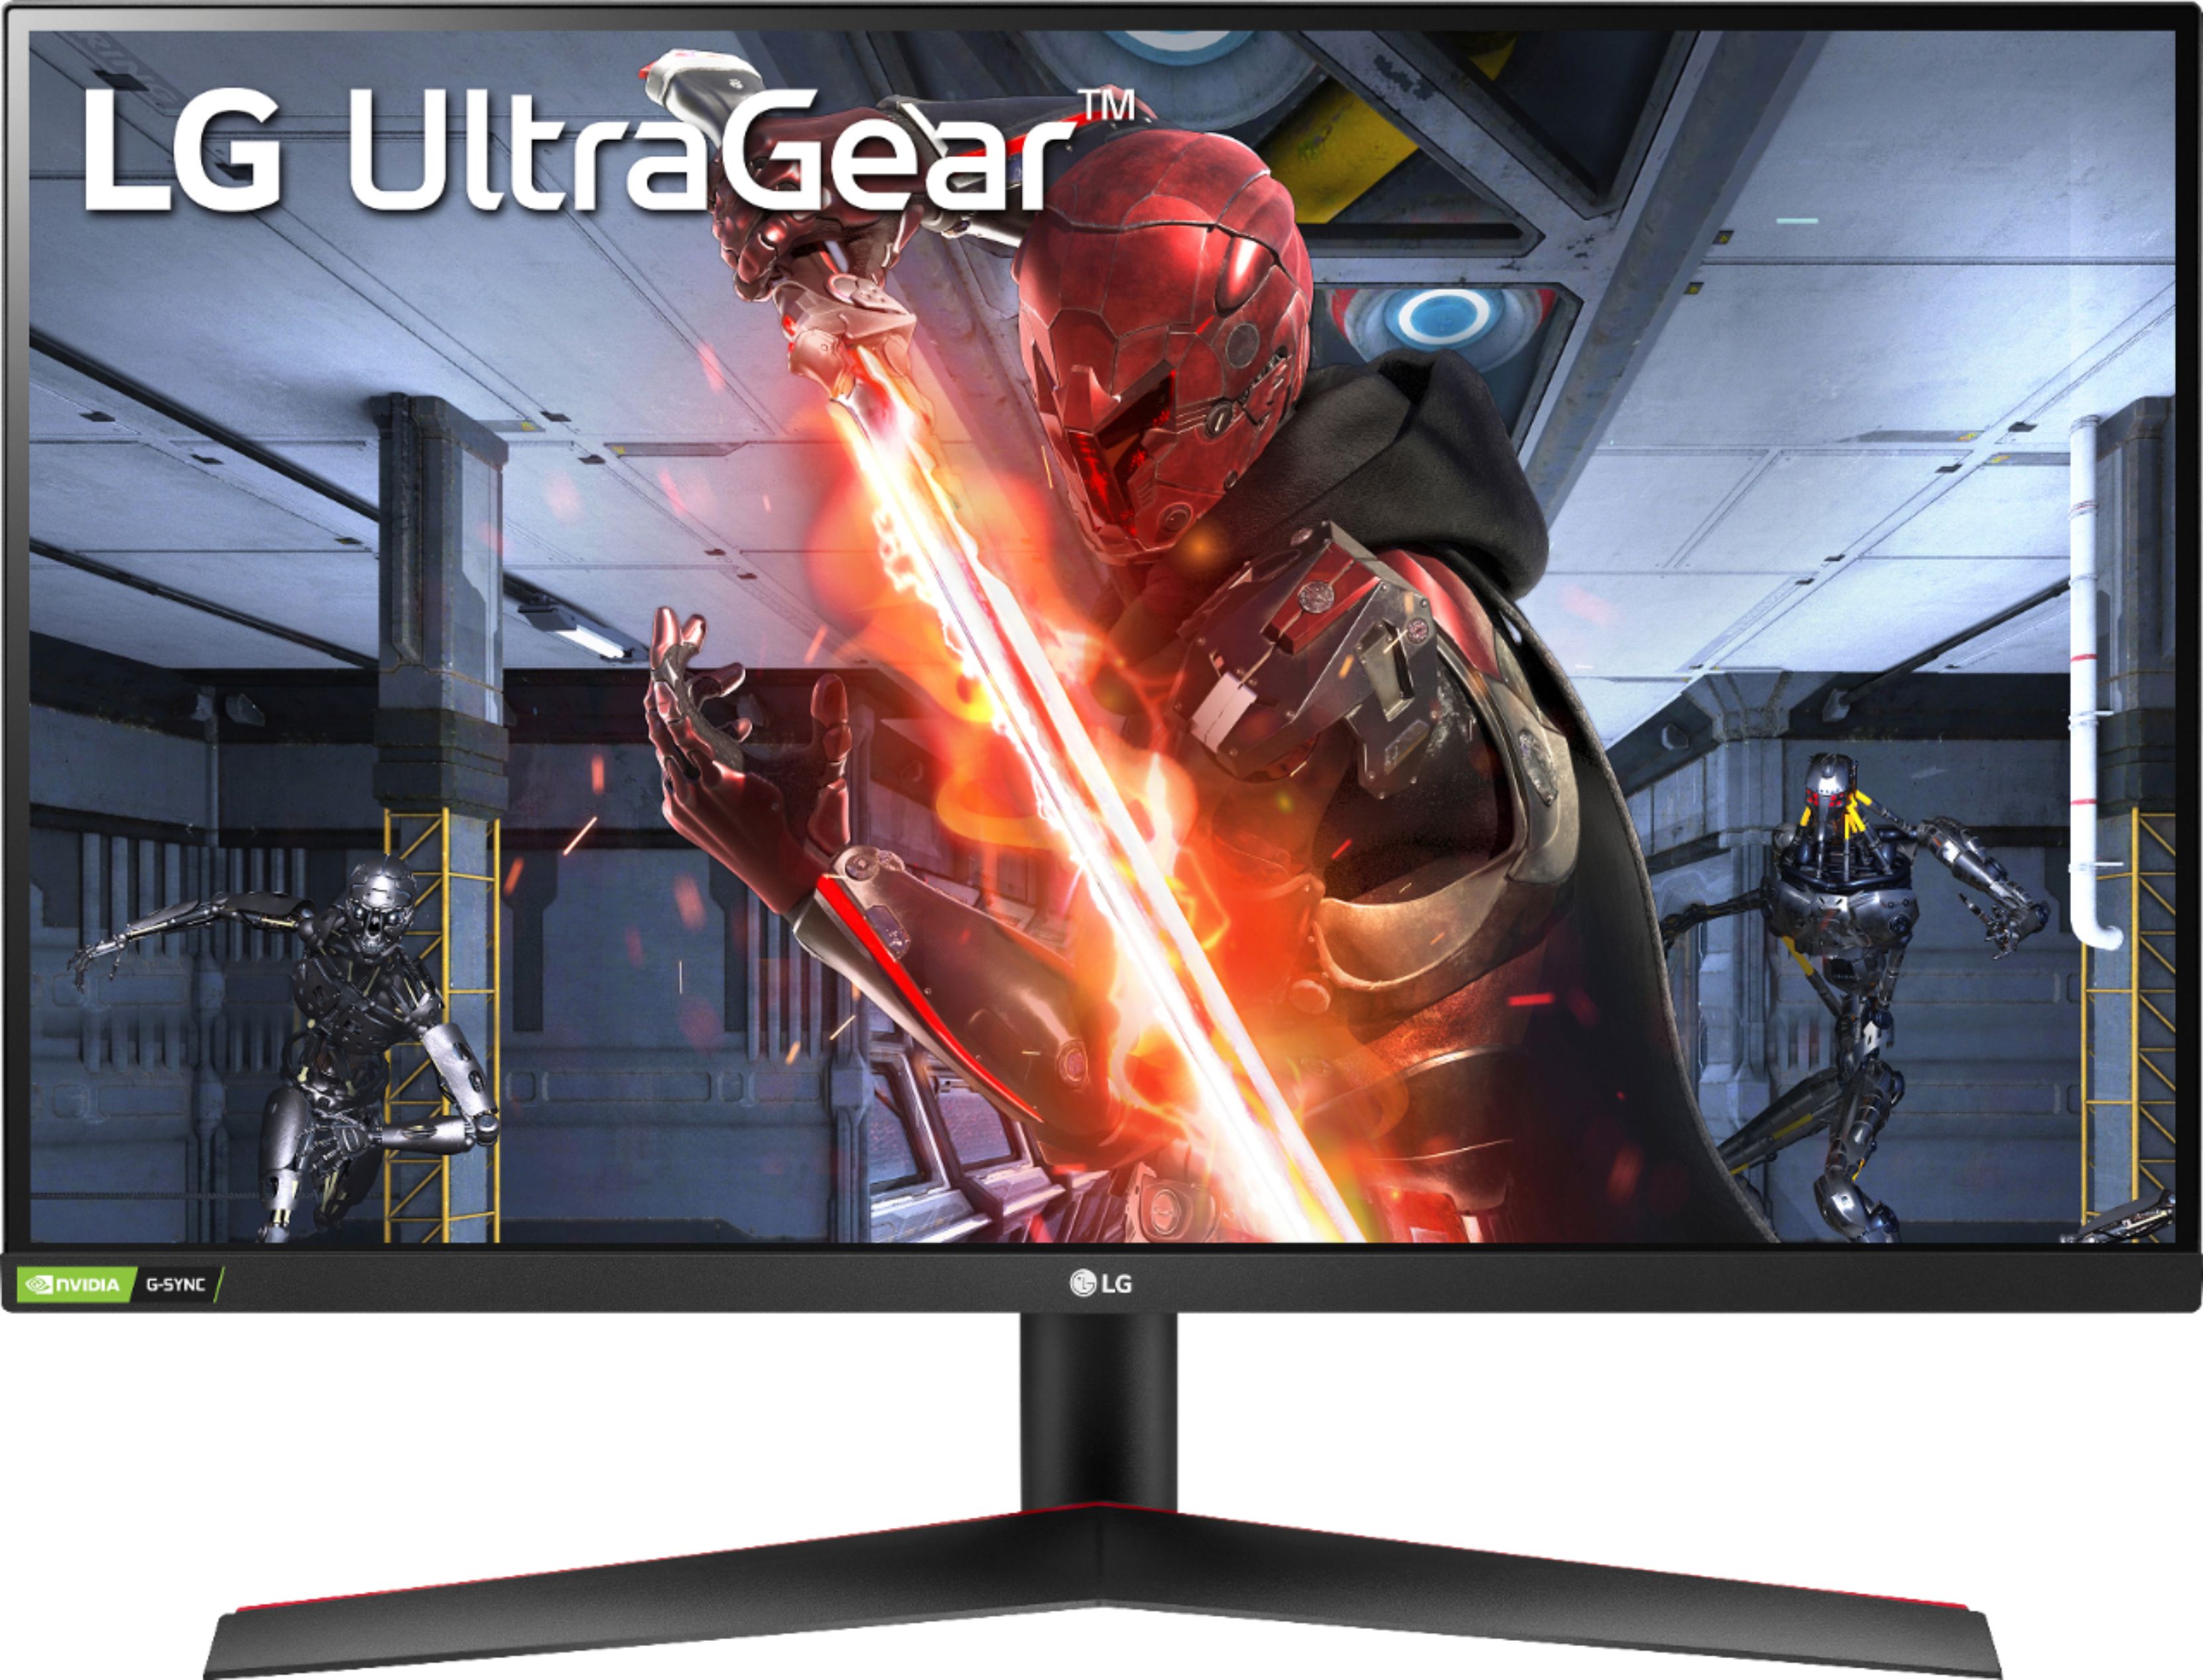 LG - UltraGear 27" IPS LED FHD G-Sync Compatible Monitor with HDR (DisplayPort, HDMI) - Black